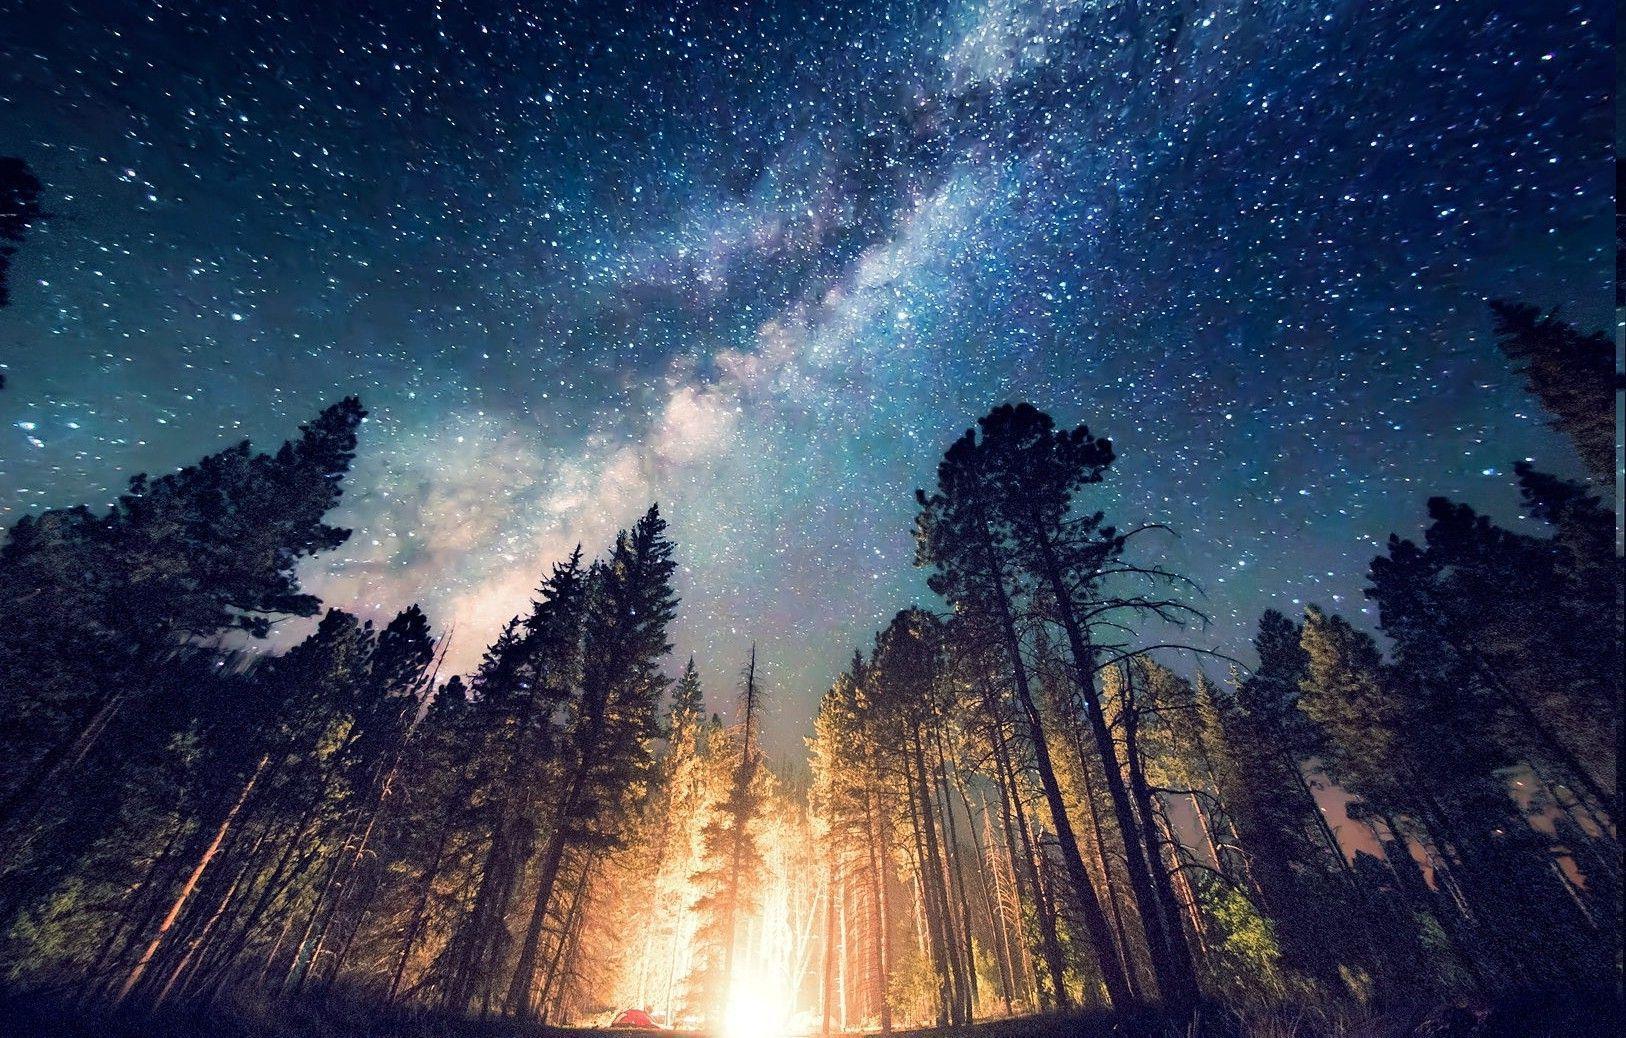 forest, Camping, Starry Night, Trees, Milky Way, Long Exposure